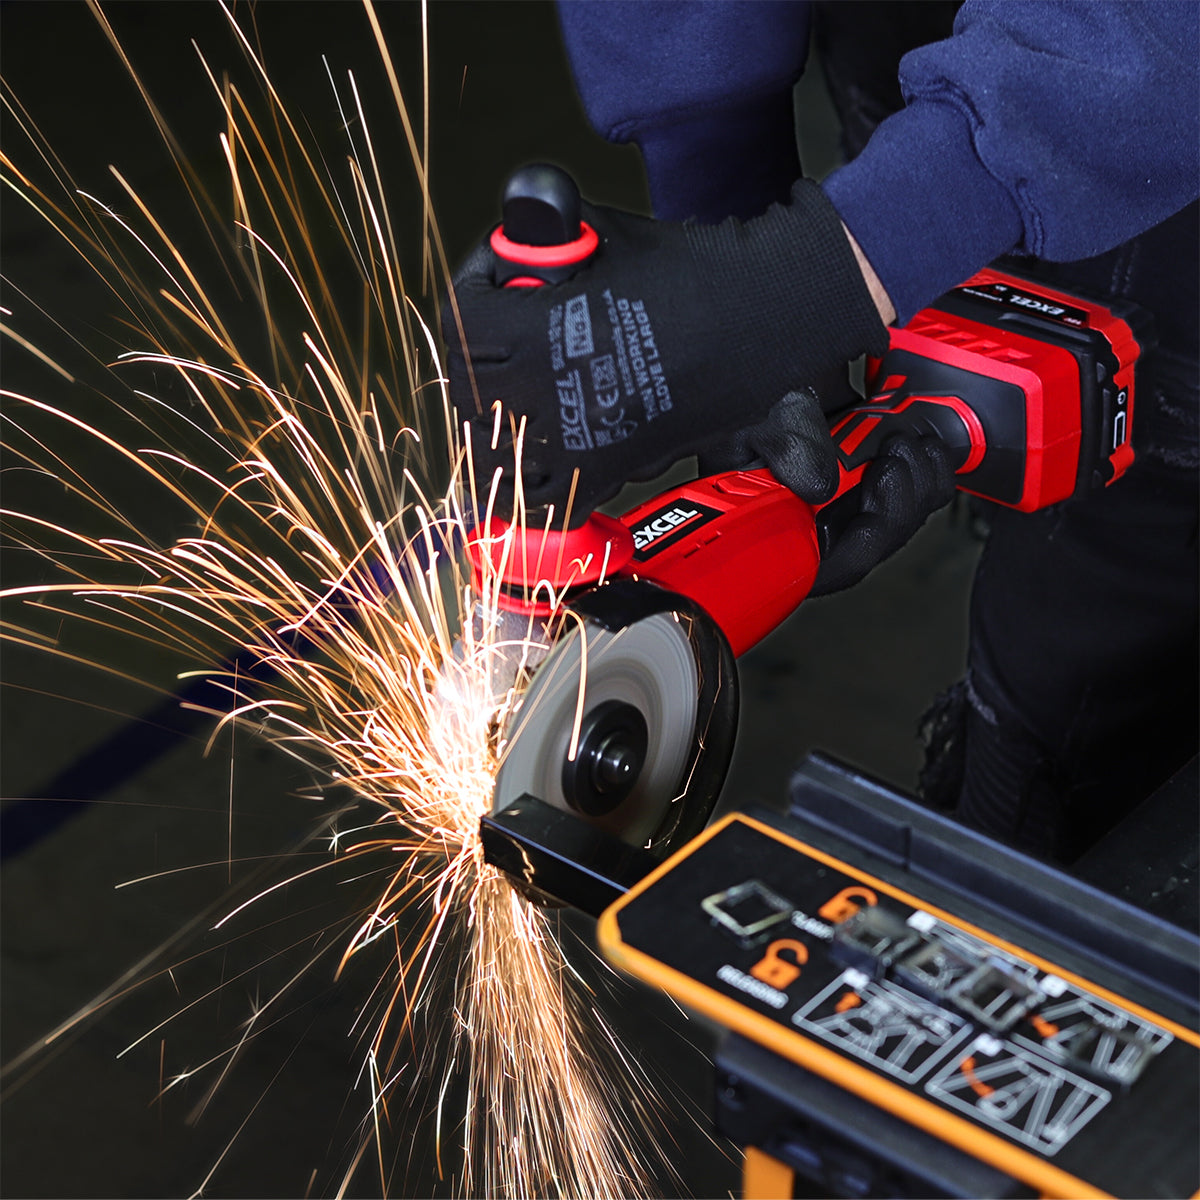 Excel 18V Cordless Angle Grinder 115mm with 1 x 5.0Ah Battery & Charger EXL555B